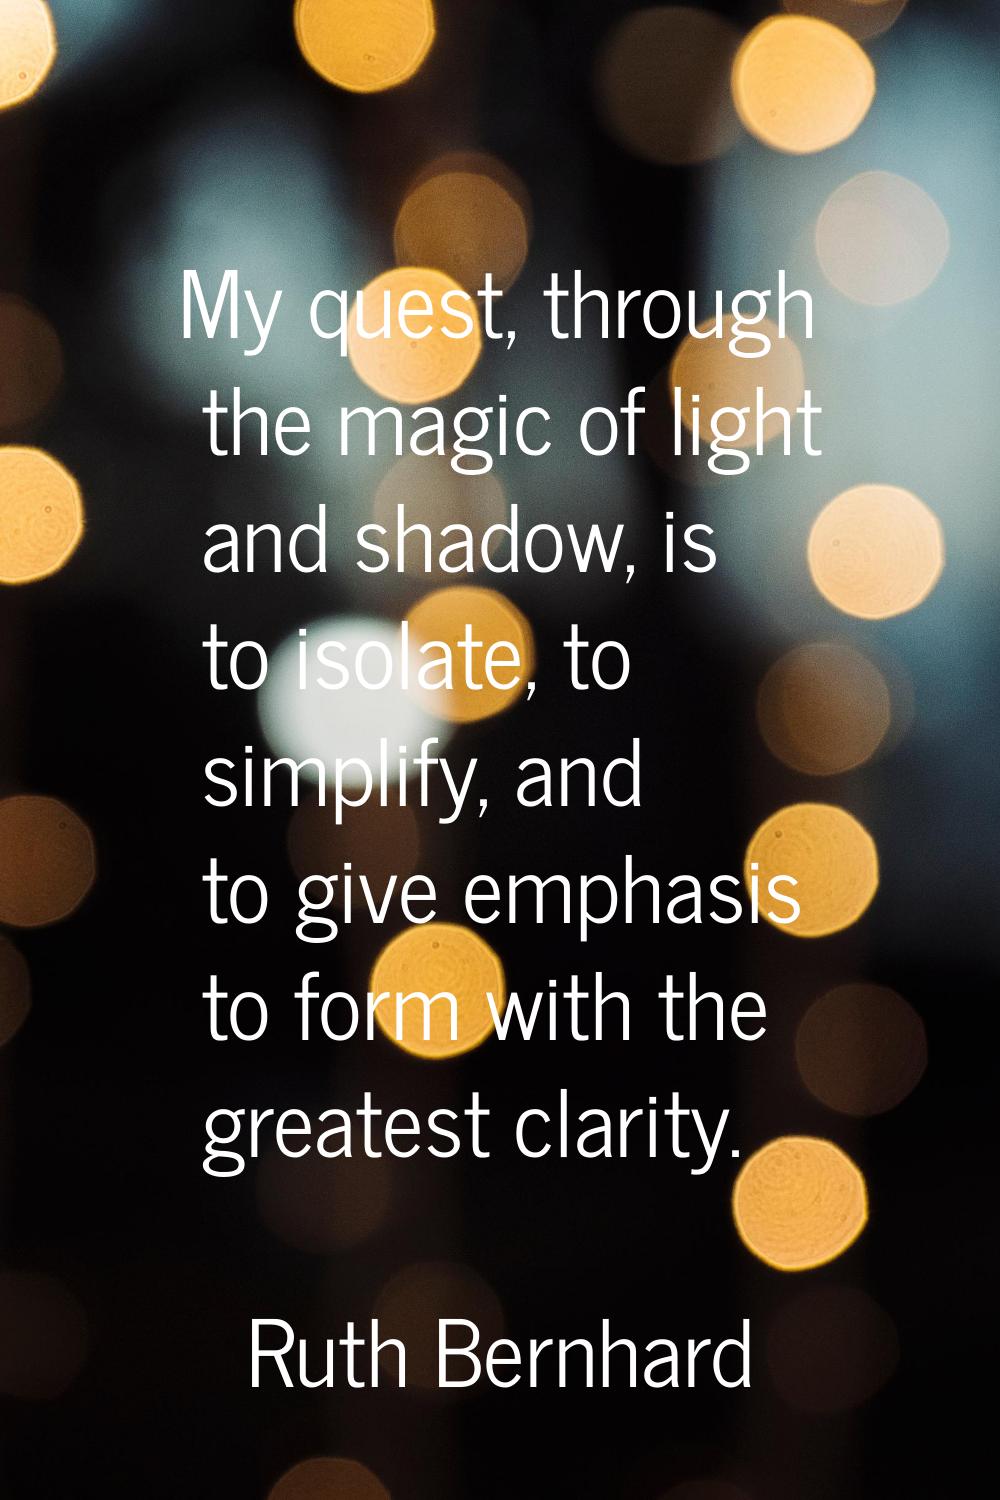 My quest, through the magic of light and shadow, is to isolate, to simplify, and to give emphasis t